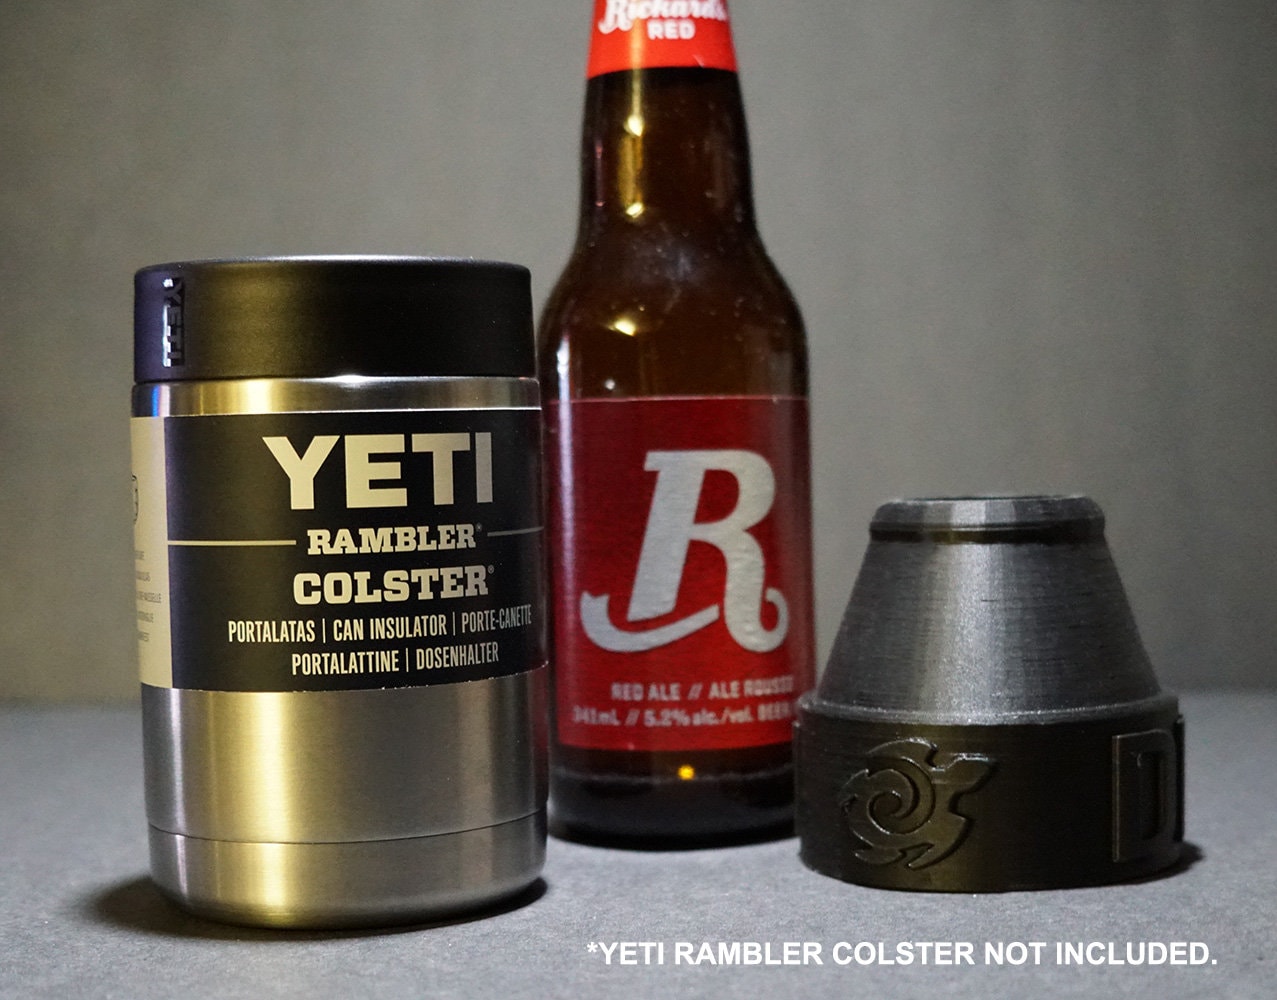 Coool-it,silicone Adaptor for Long Neck bottles.Convert Your Stainless Can Cooler to Best Long Neck Bottle insulator! Fits Yeti/Rtic/Ozark Trail Can